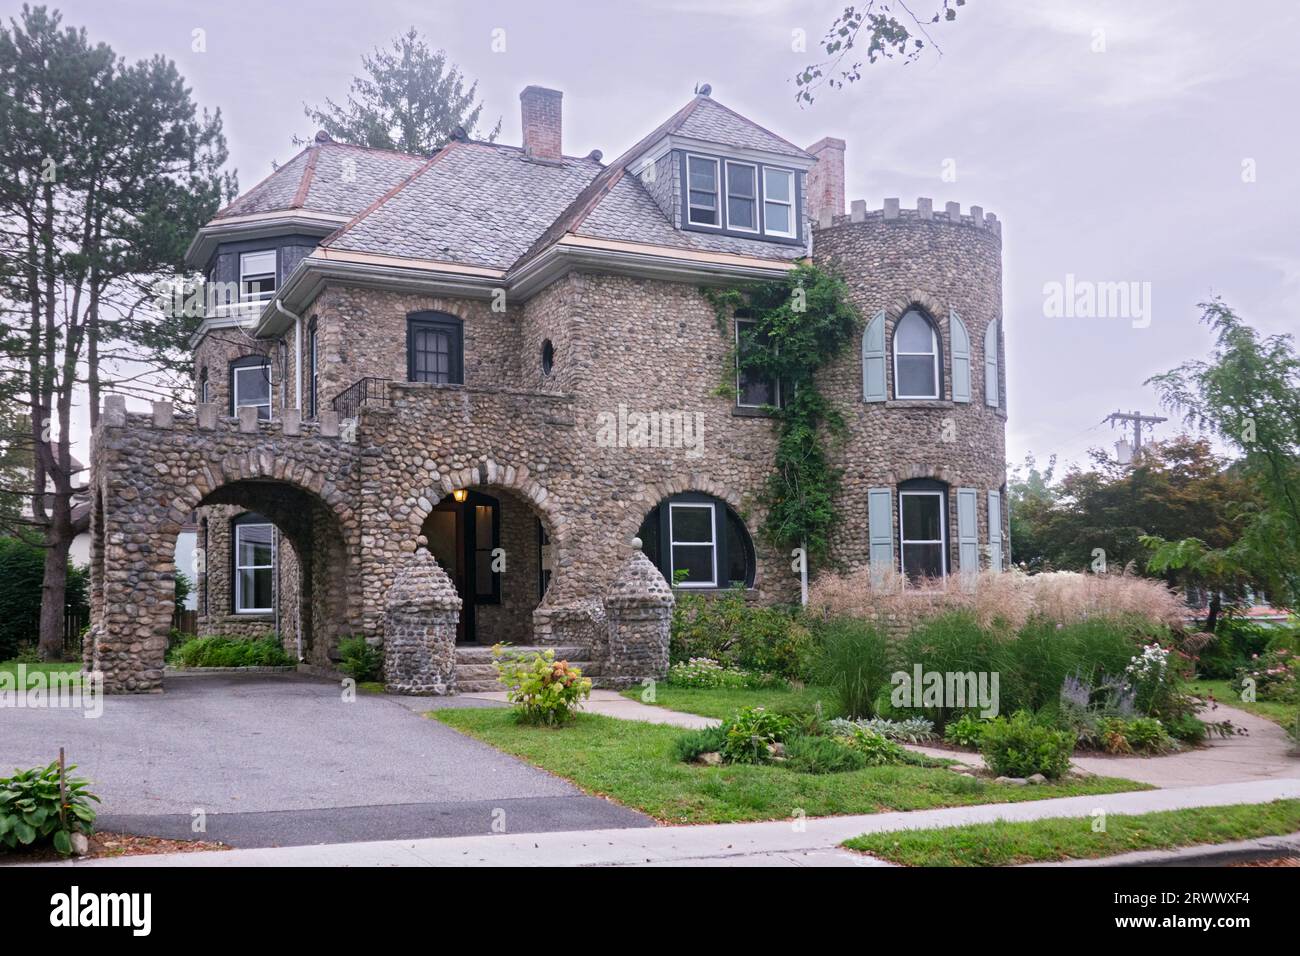 16 Bedford Road in Katonah. A  rentable mansion moved from Old Katonah at the end of the 19th Century. In Westchester, New York. Stock Photo